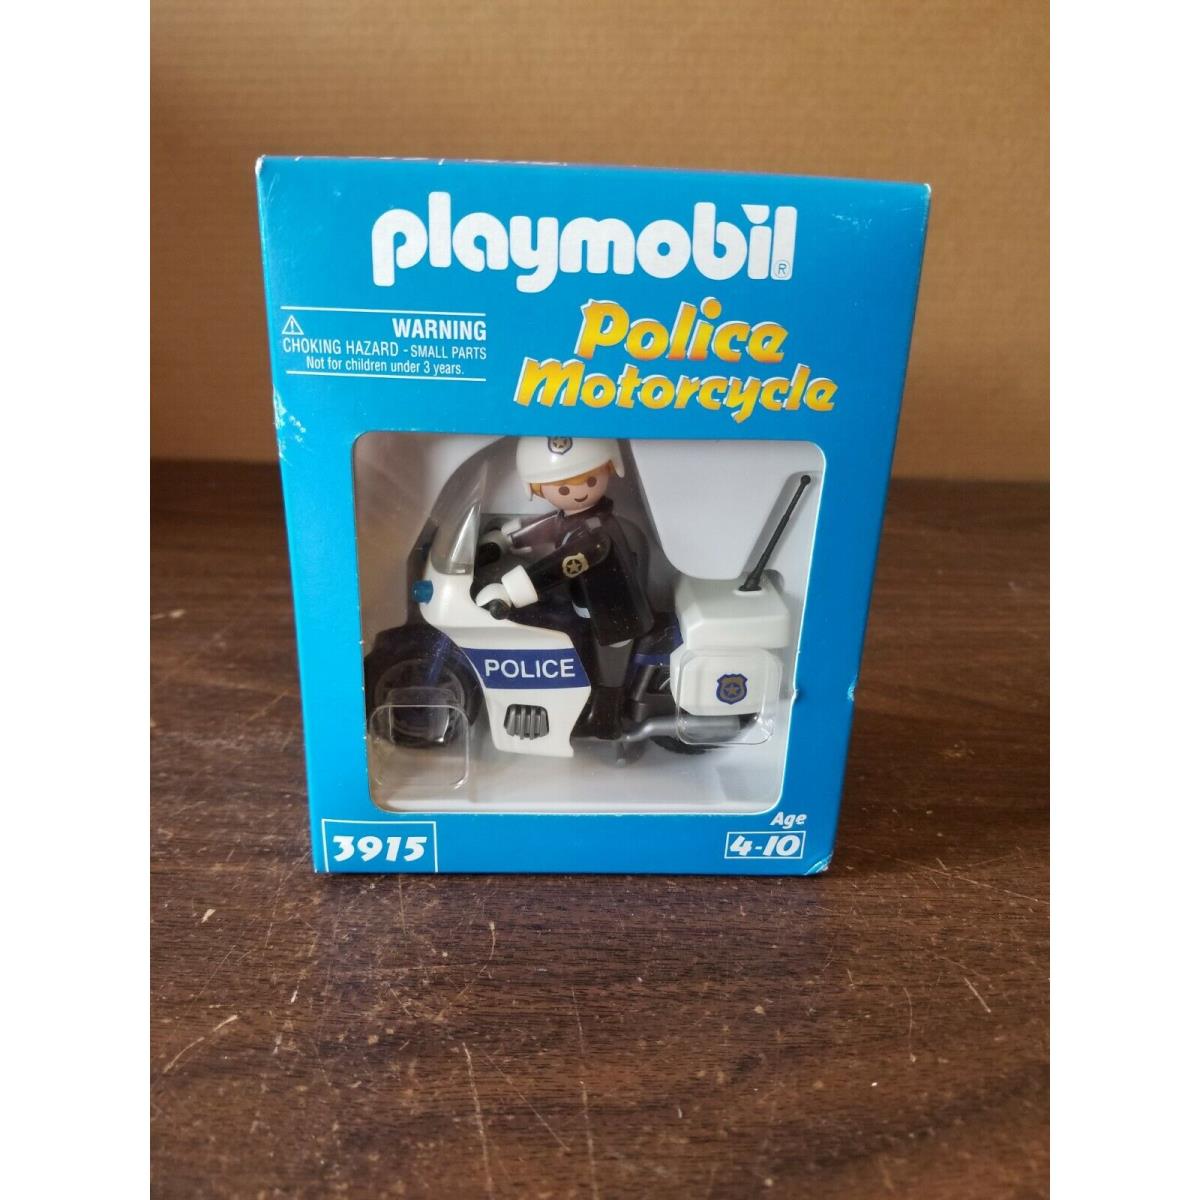 Playmobil Policeman with Motorcycle Set 3915 Vintage Retired Rare